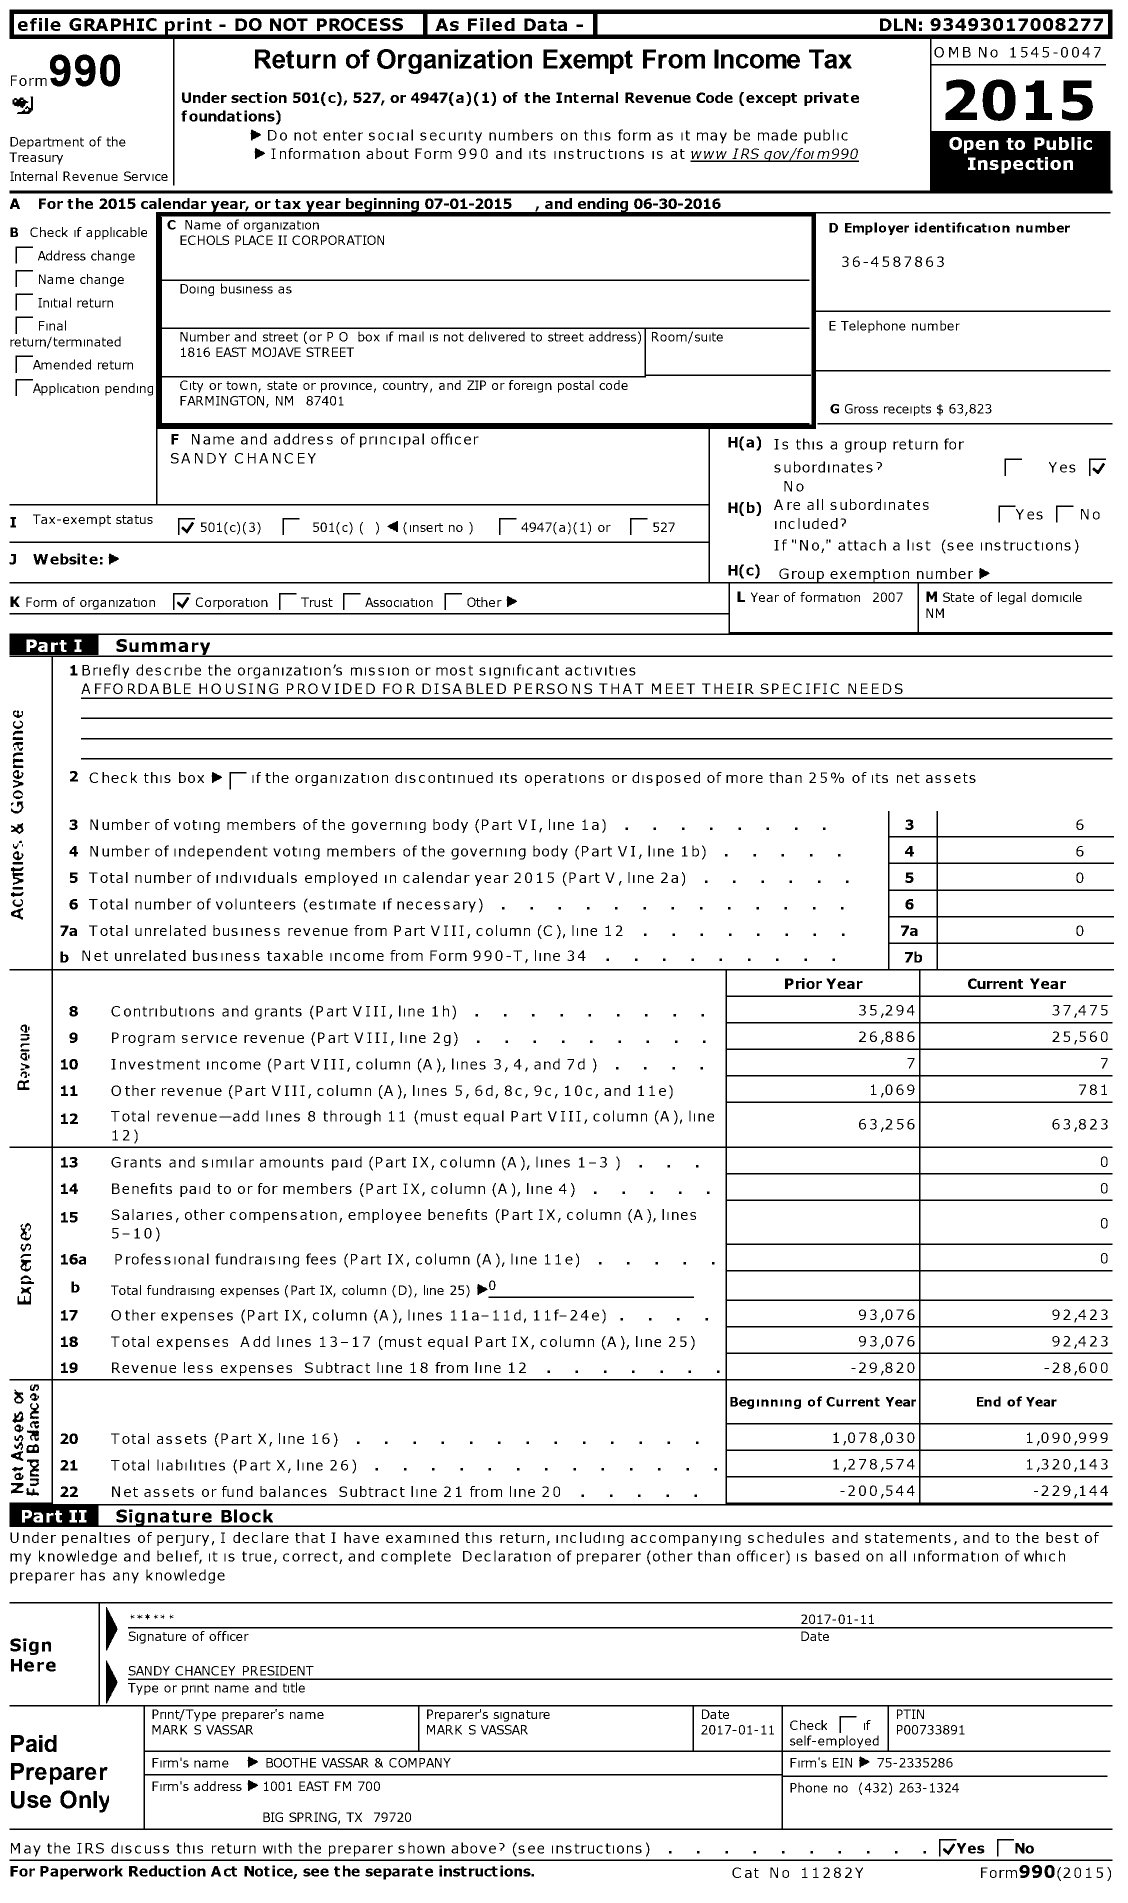 Image of first page of 2015 Form 990 for Echols Place Ii Corporation